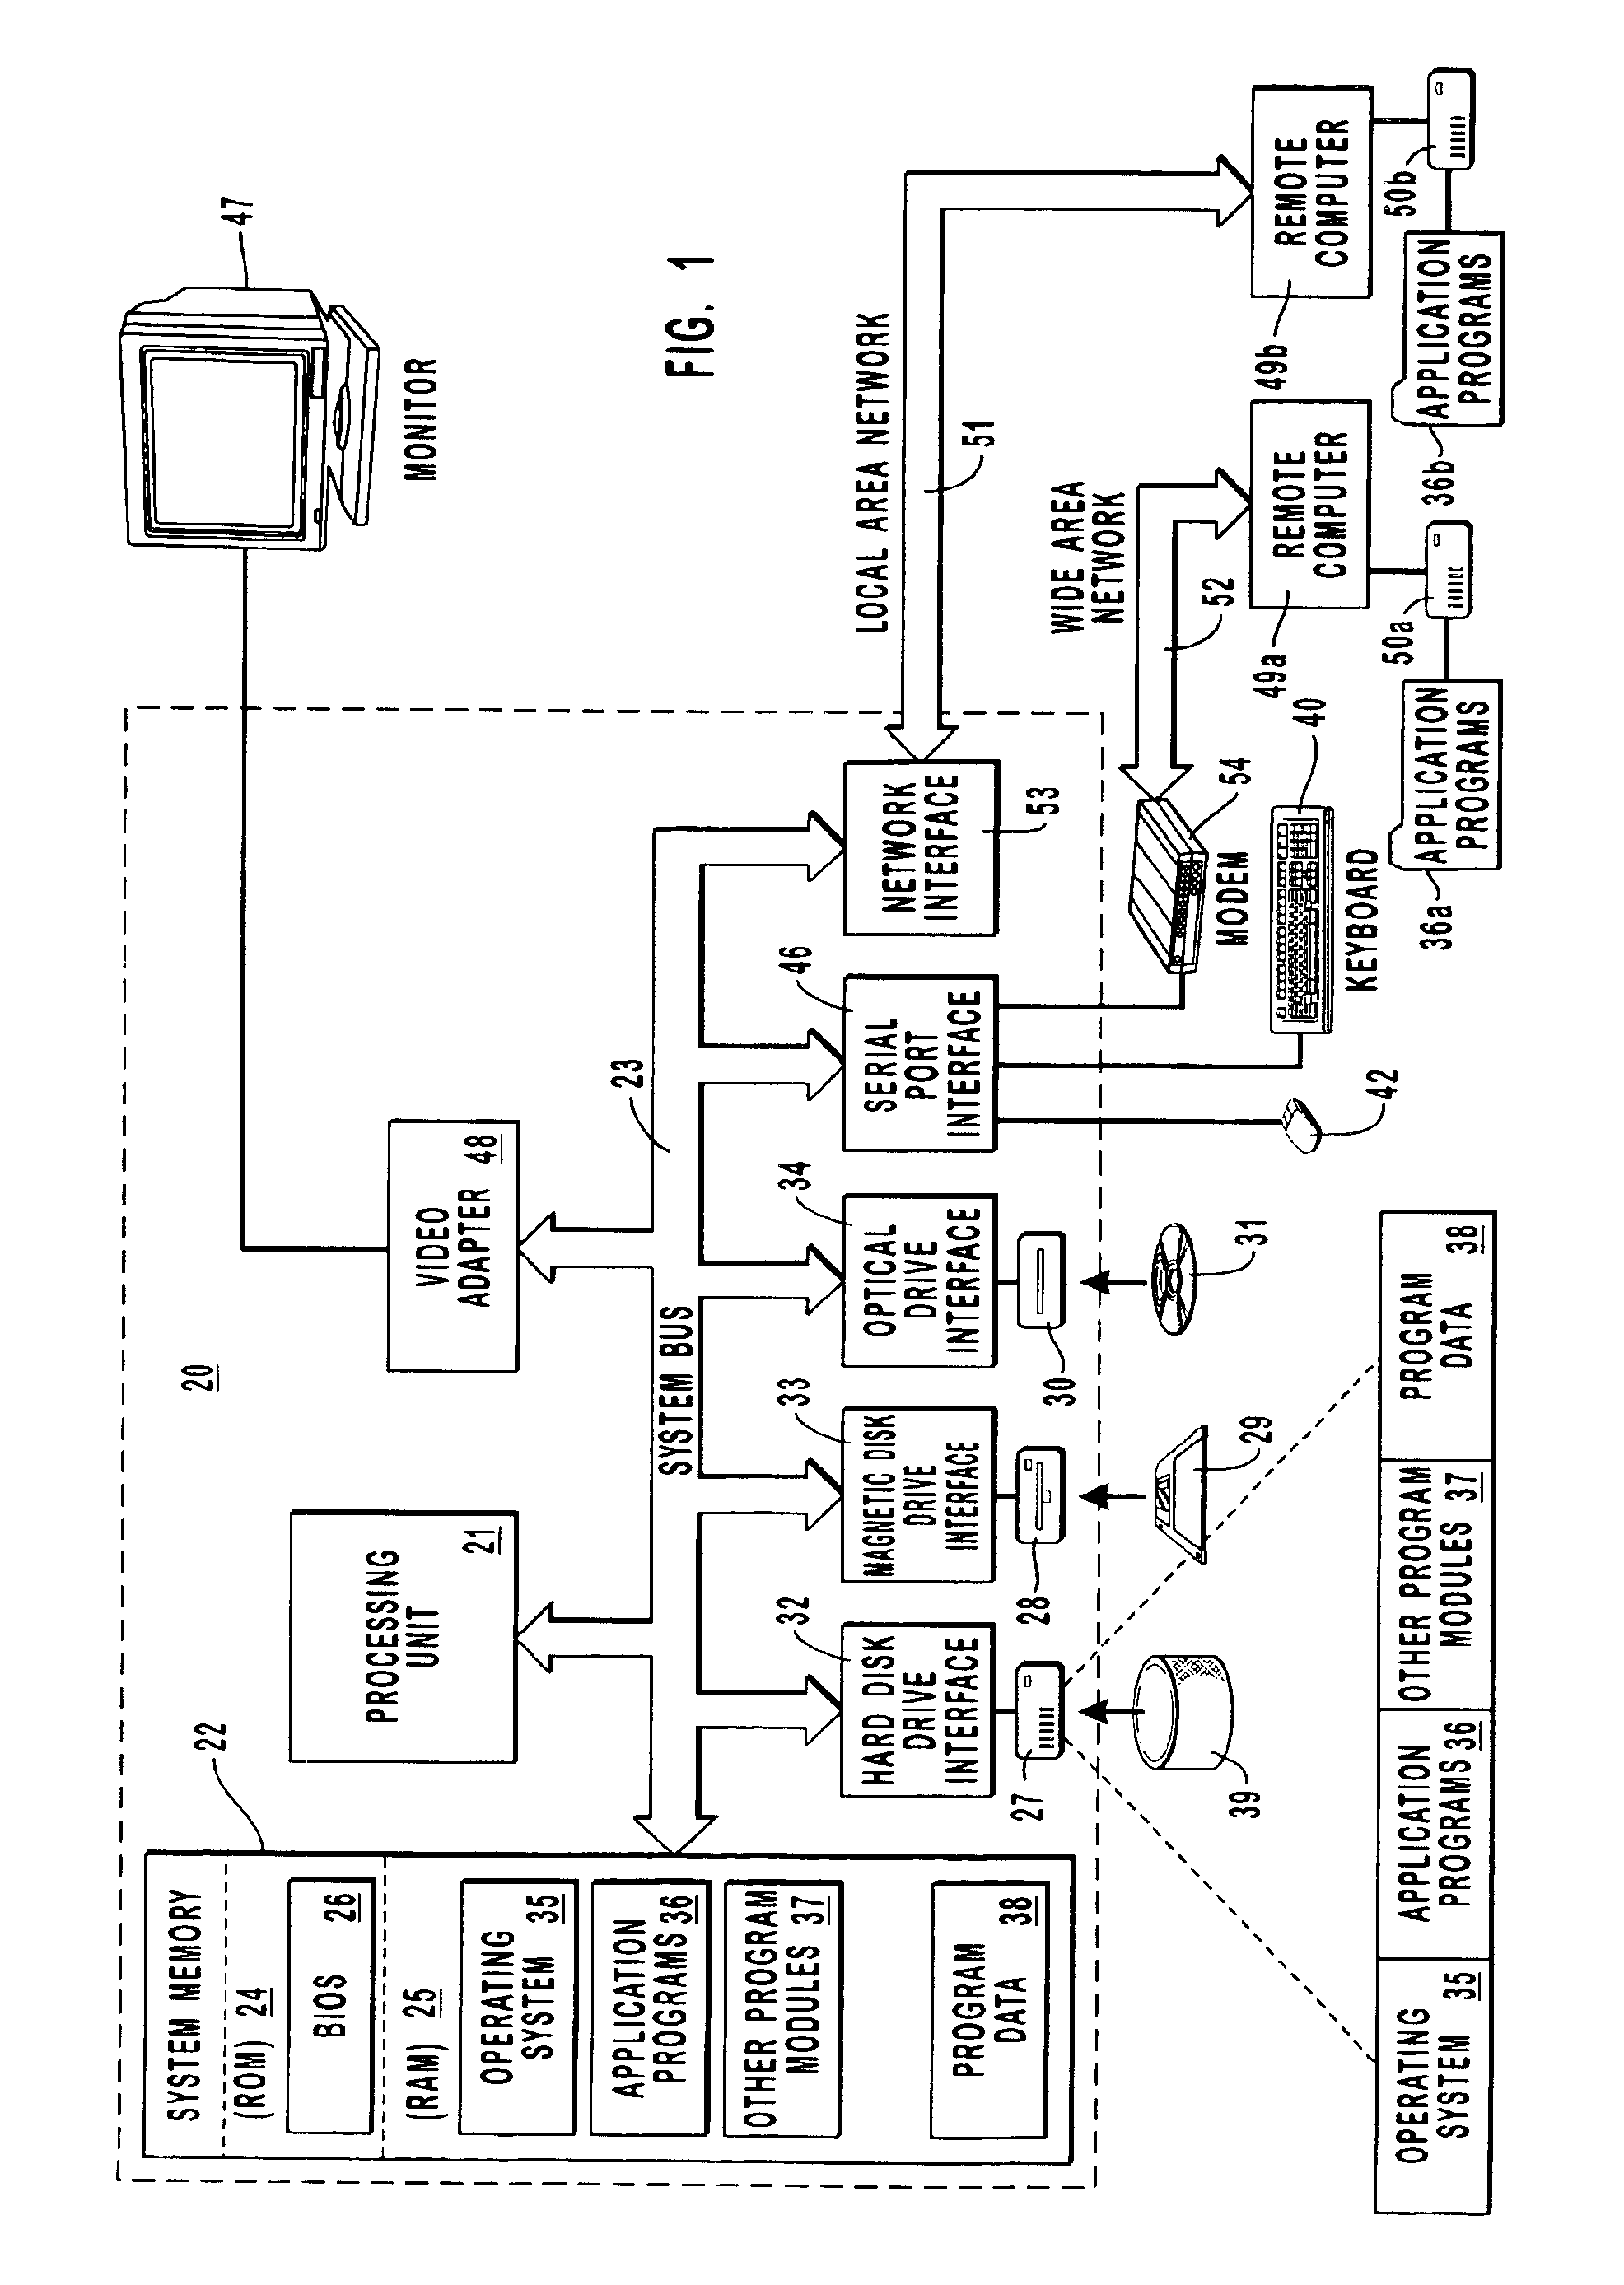 Systems and methods for detecting and resolving resource conflicts